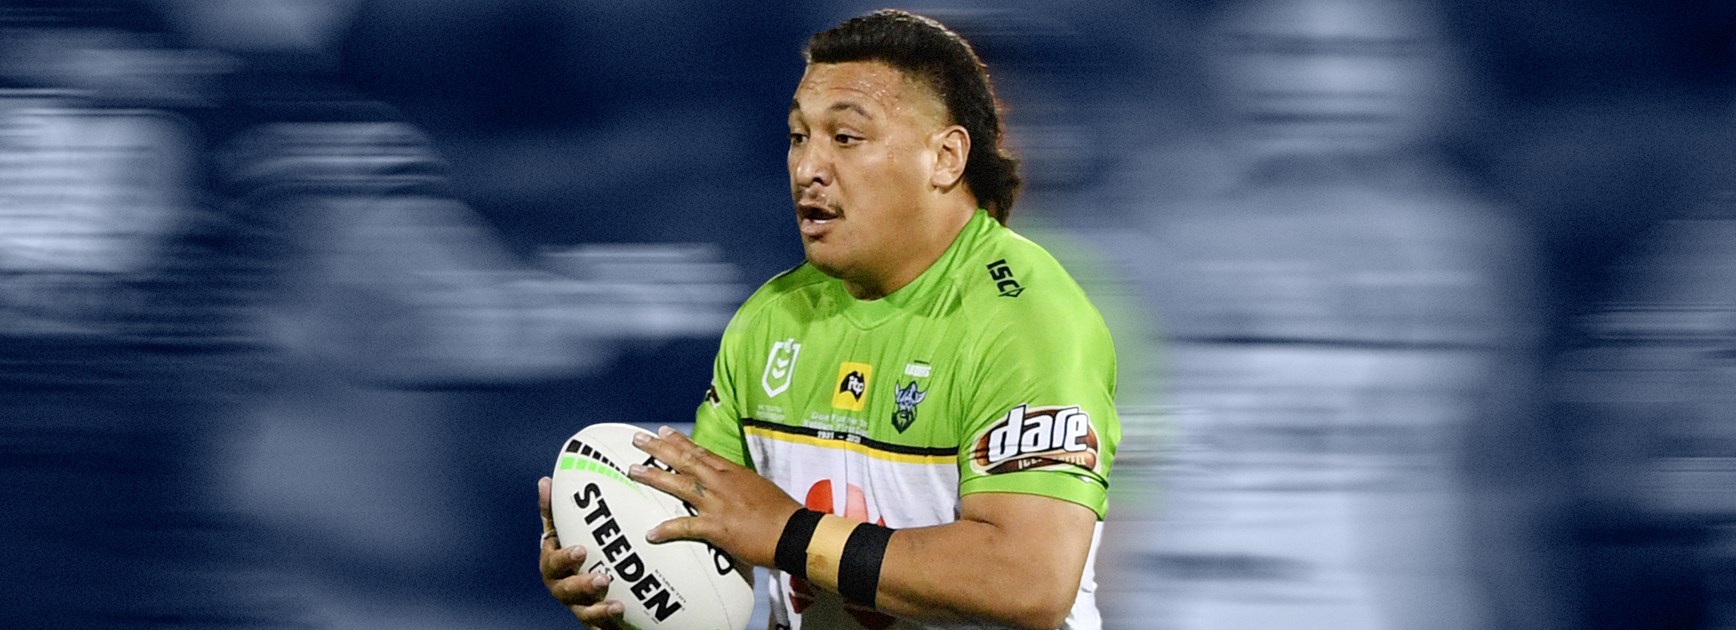 Prop on the hop: Papalii smashes season-best in try-saving sprint